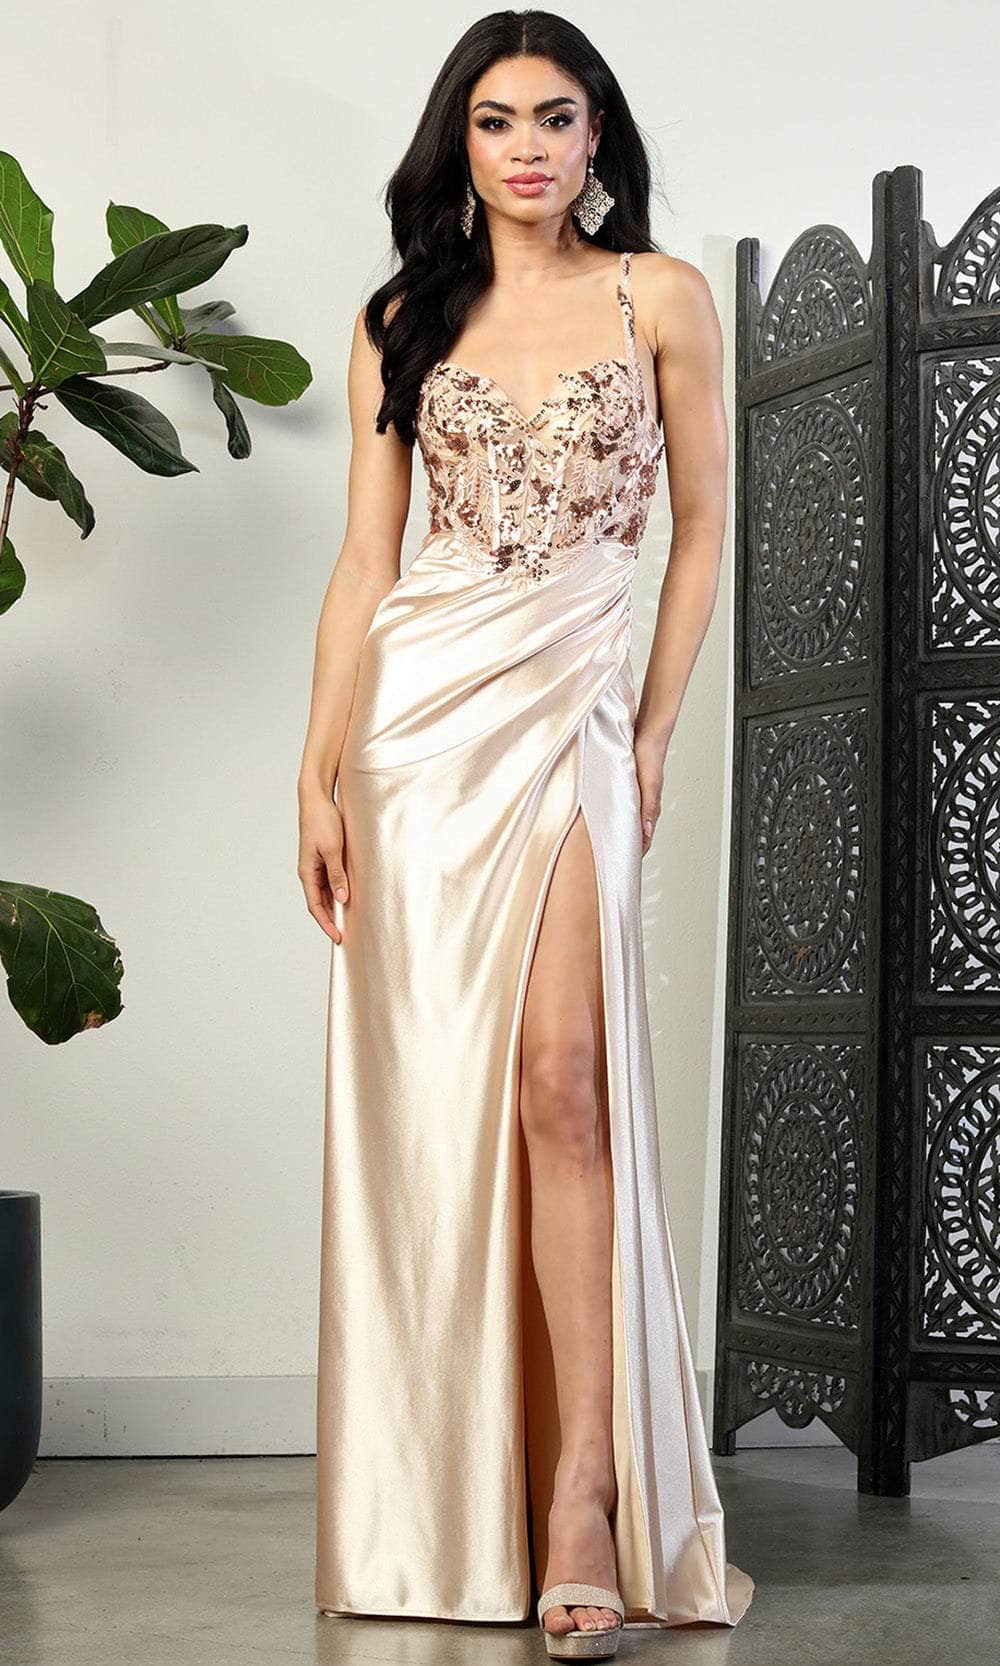 May Queen MQ2006 - Contrast Embellished Prom Dress Prom Dresses 4 / Gold